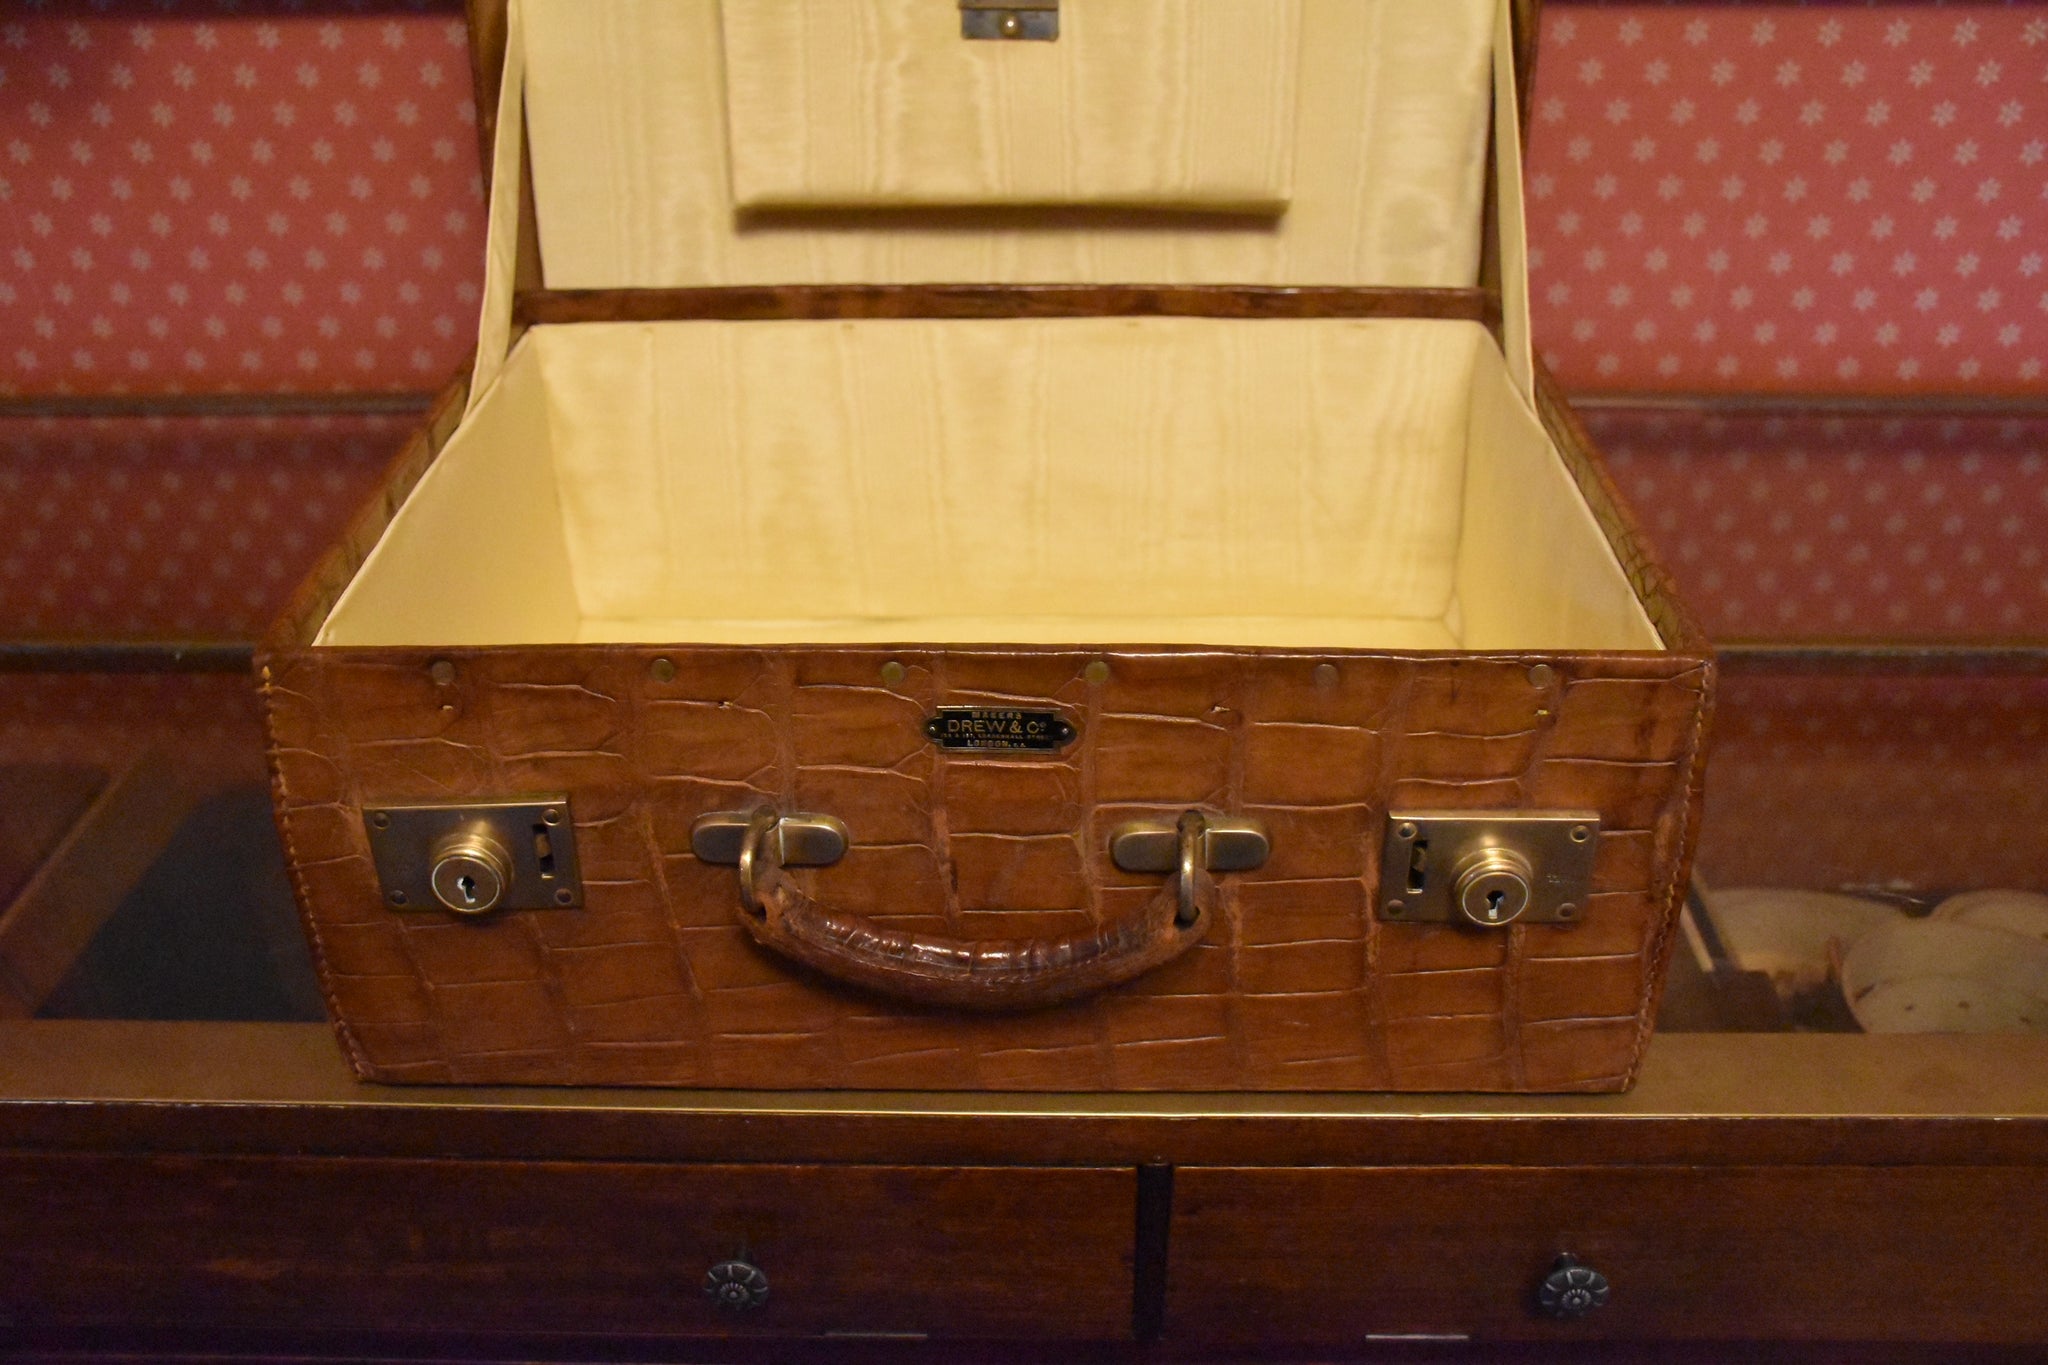 Drew and Sons Piccadilly Circus Suitcase in Leather, Early 20th